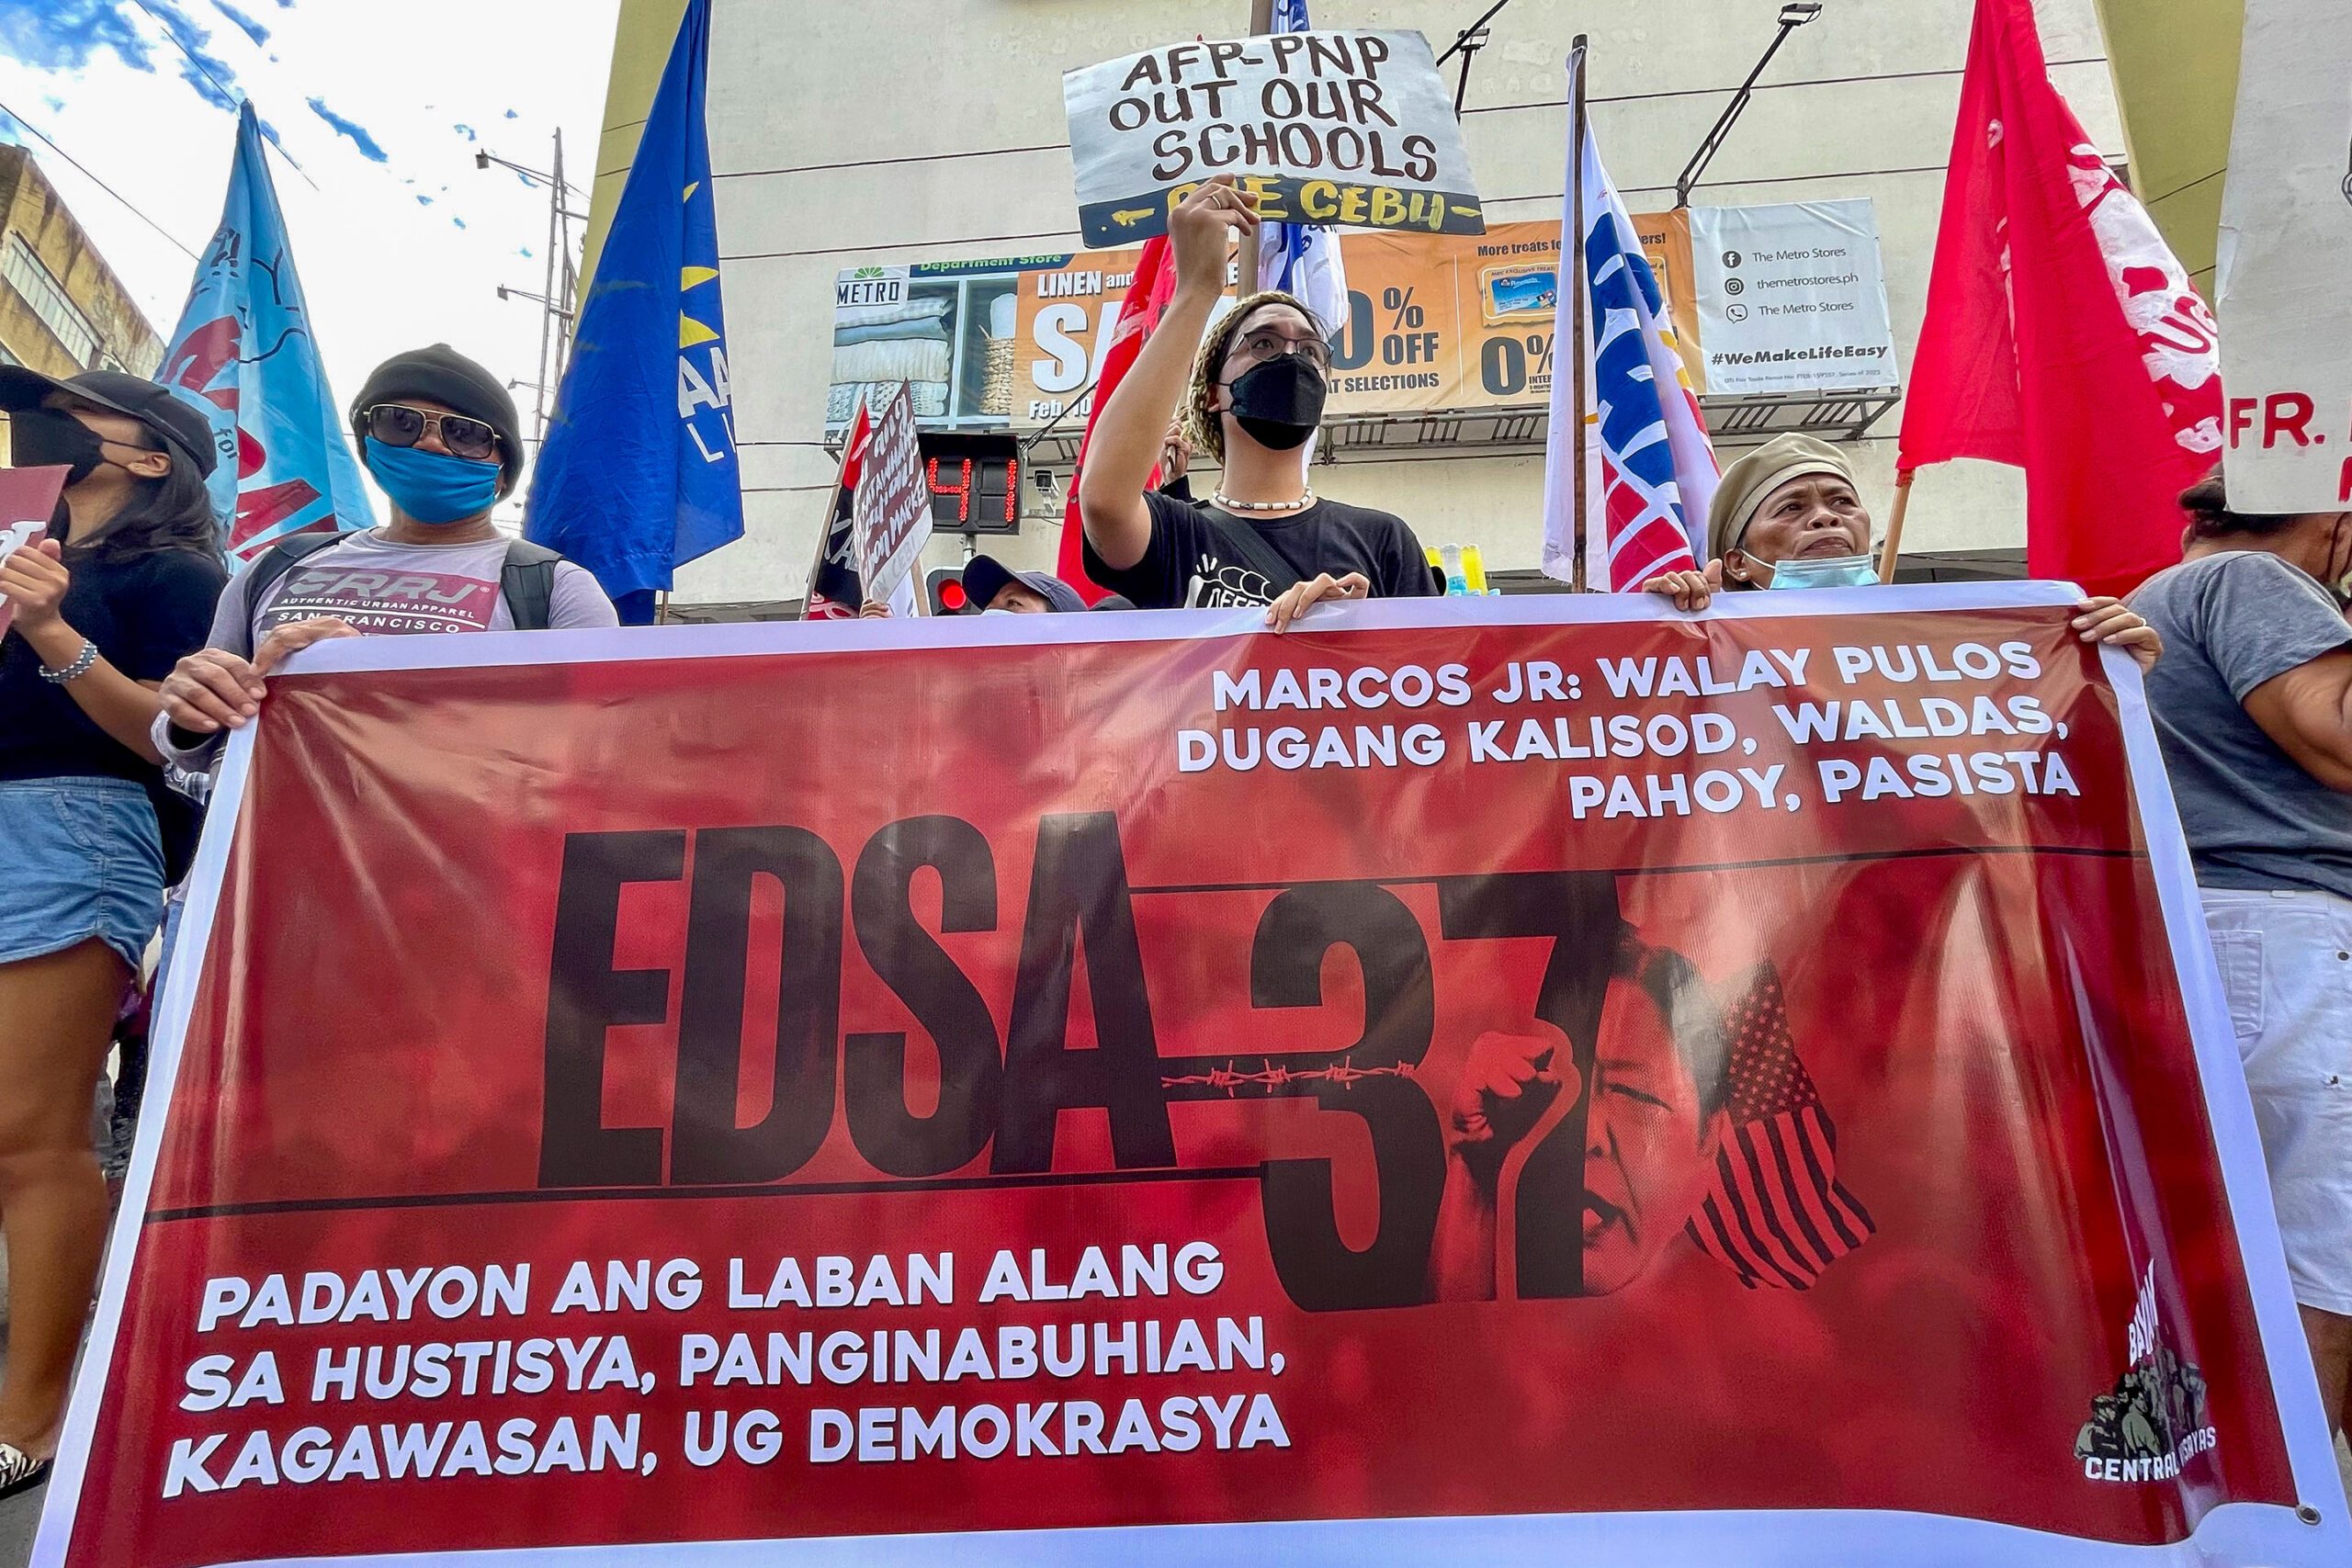 During 37th EDSA commemoration rally, Cebuanos renew calls for justice for slain activists  